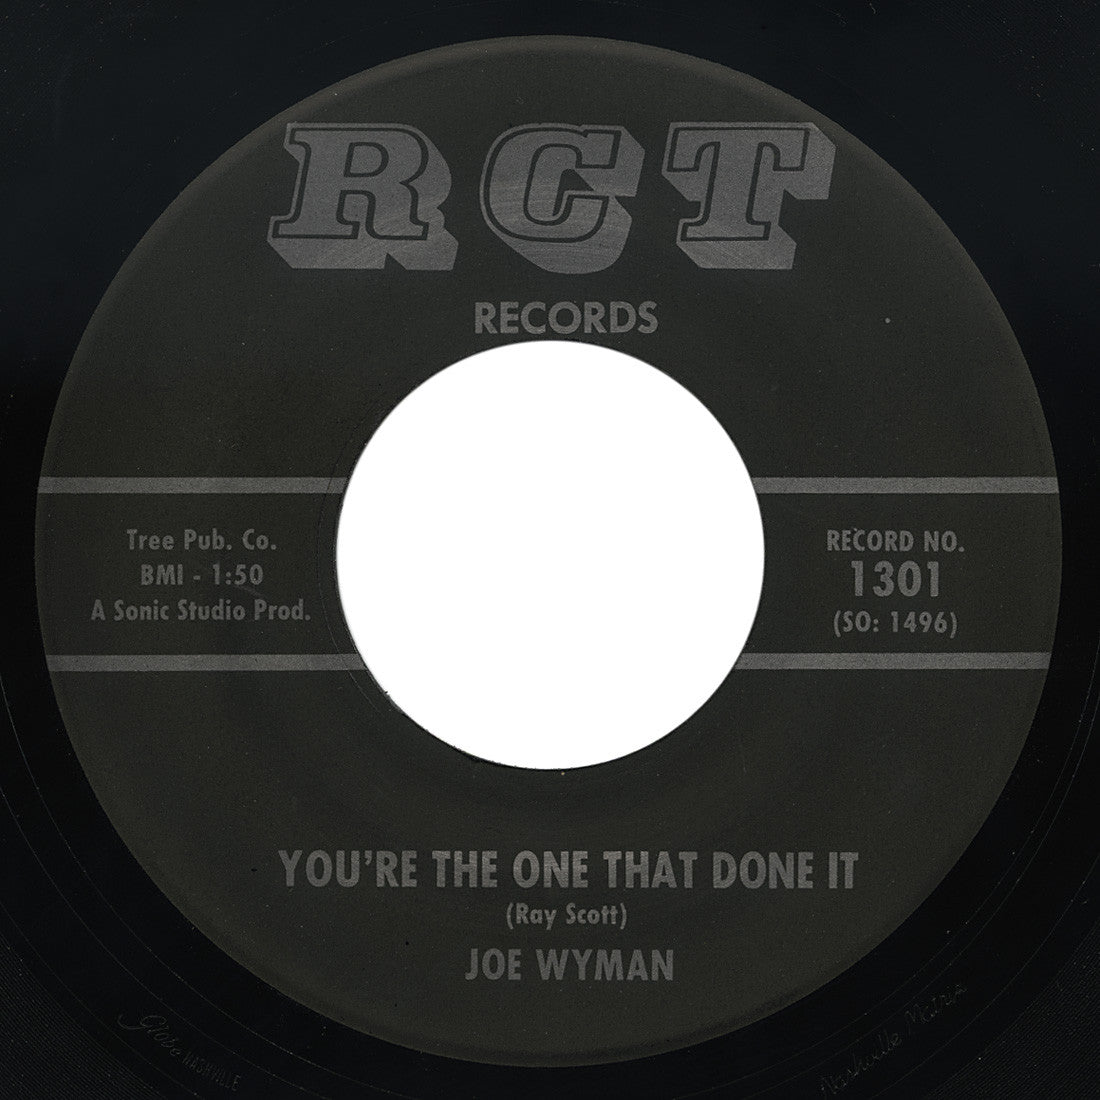 Joe Wyman – You’re The One That Done It – RCT